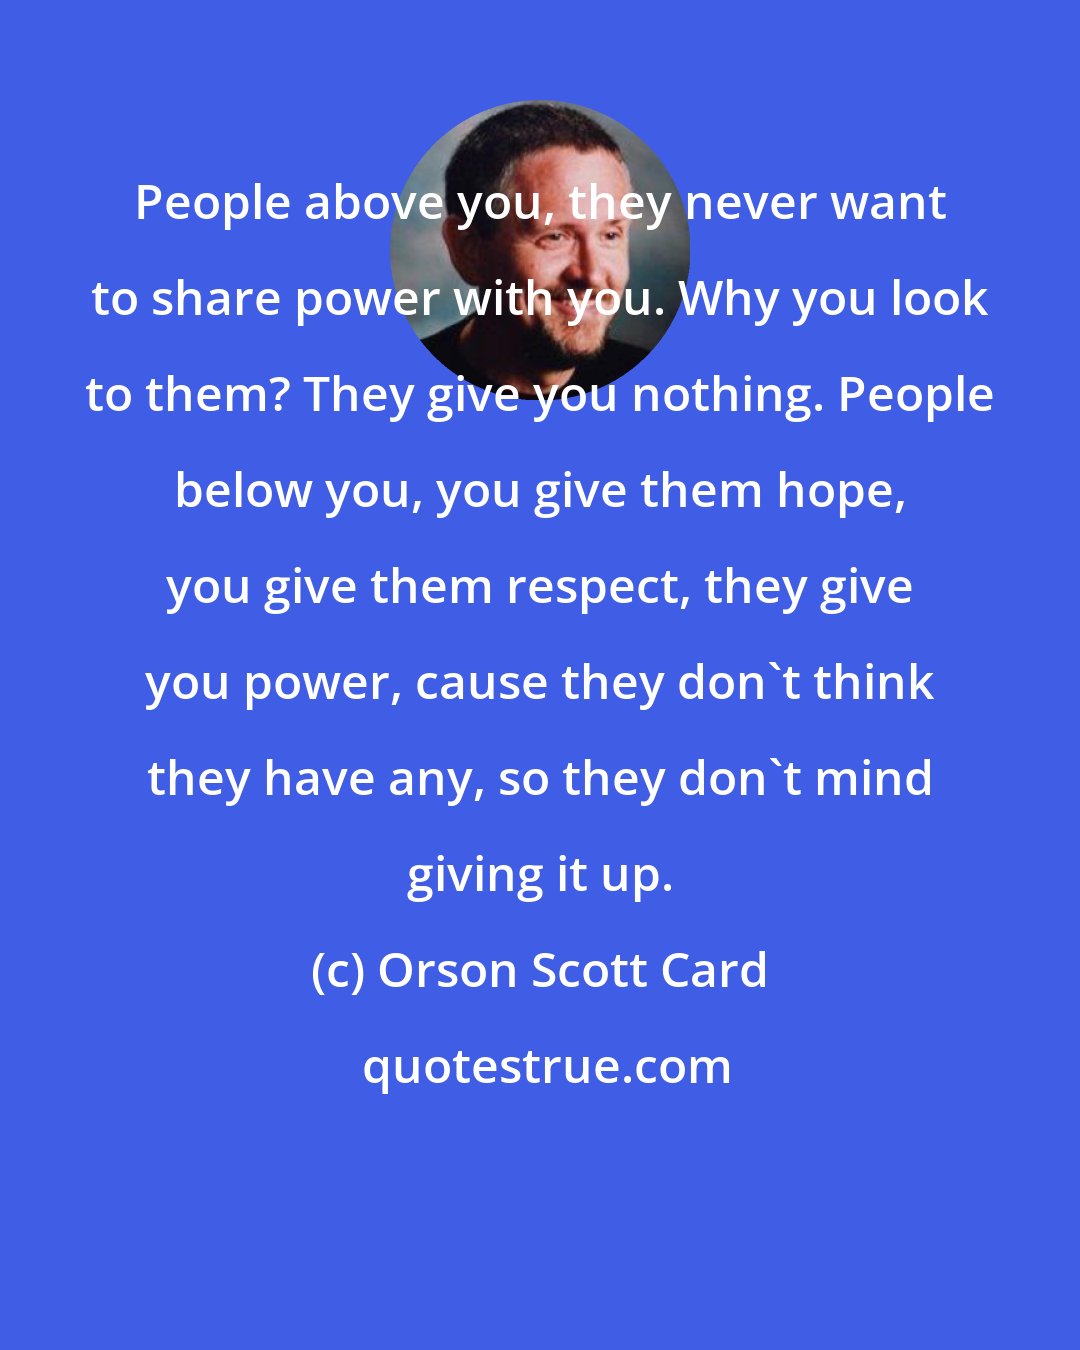 Orson Scott Card: People above you, they never want to share power with you. Why you look to them? They give you nothing. People below you, you give them hope, you give them respect, they give you power, cause they don't think they have any, so they don't mind giving it up.